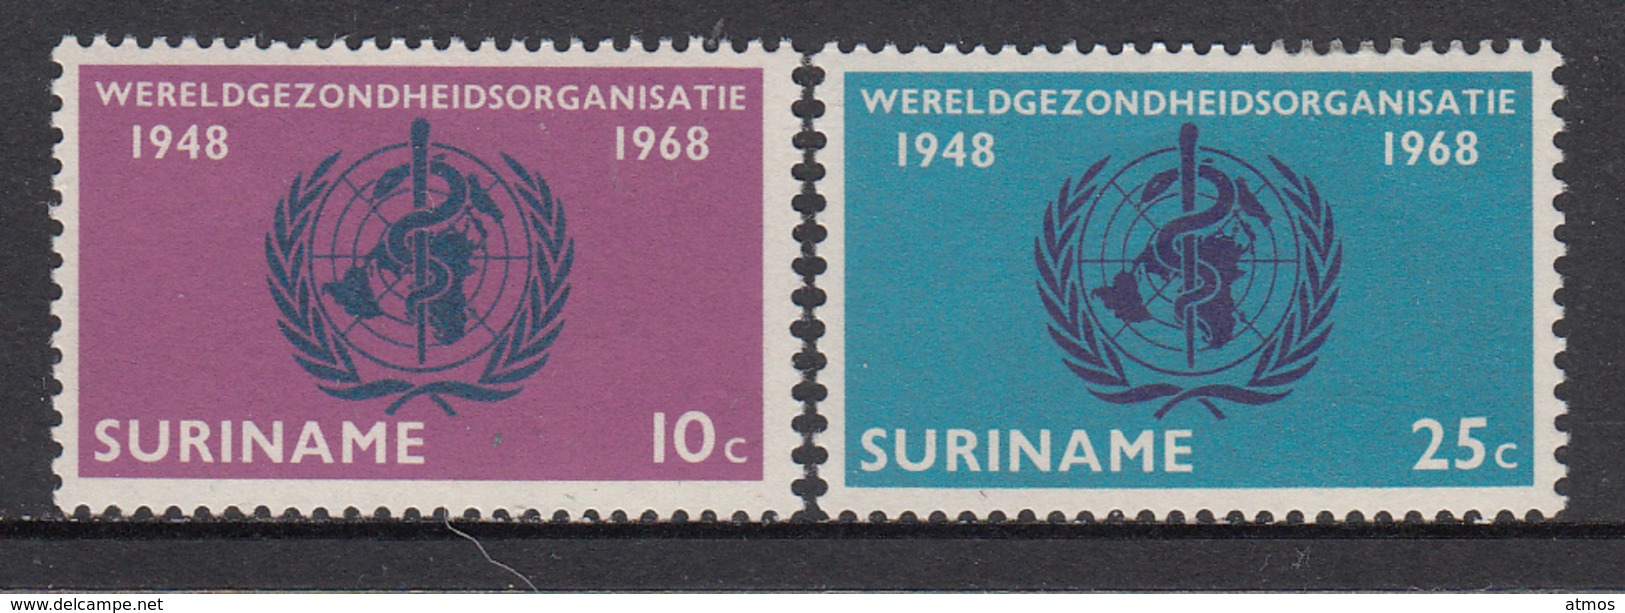 Suriname MNH NVPH Nr 495/96 From 1968 / Catw 0.60 EUR - Suriname